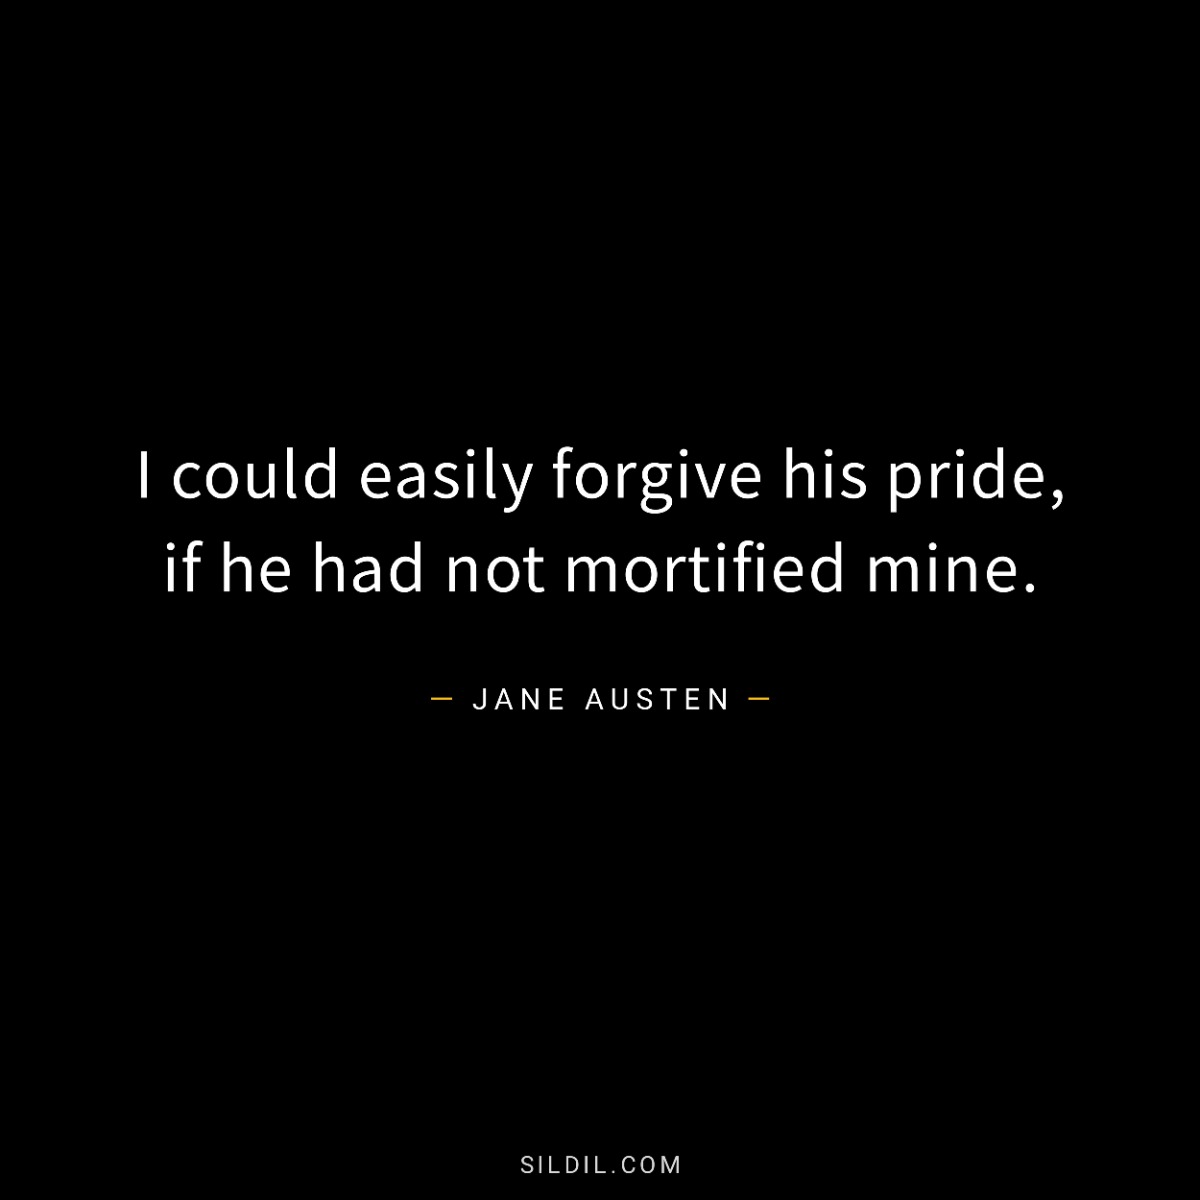 I could easily forgive his pride, if he had not mortified mine.